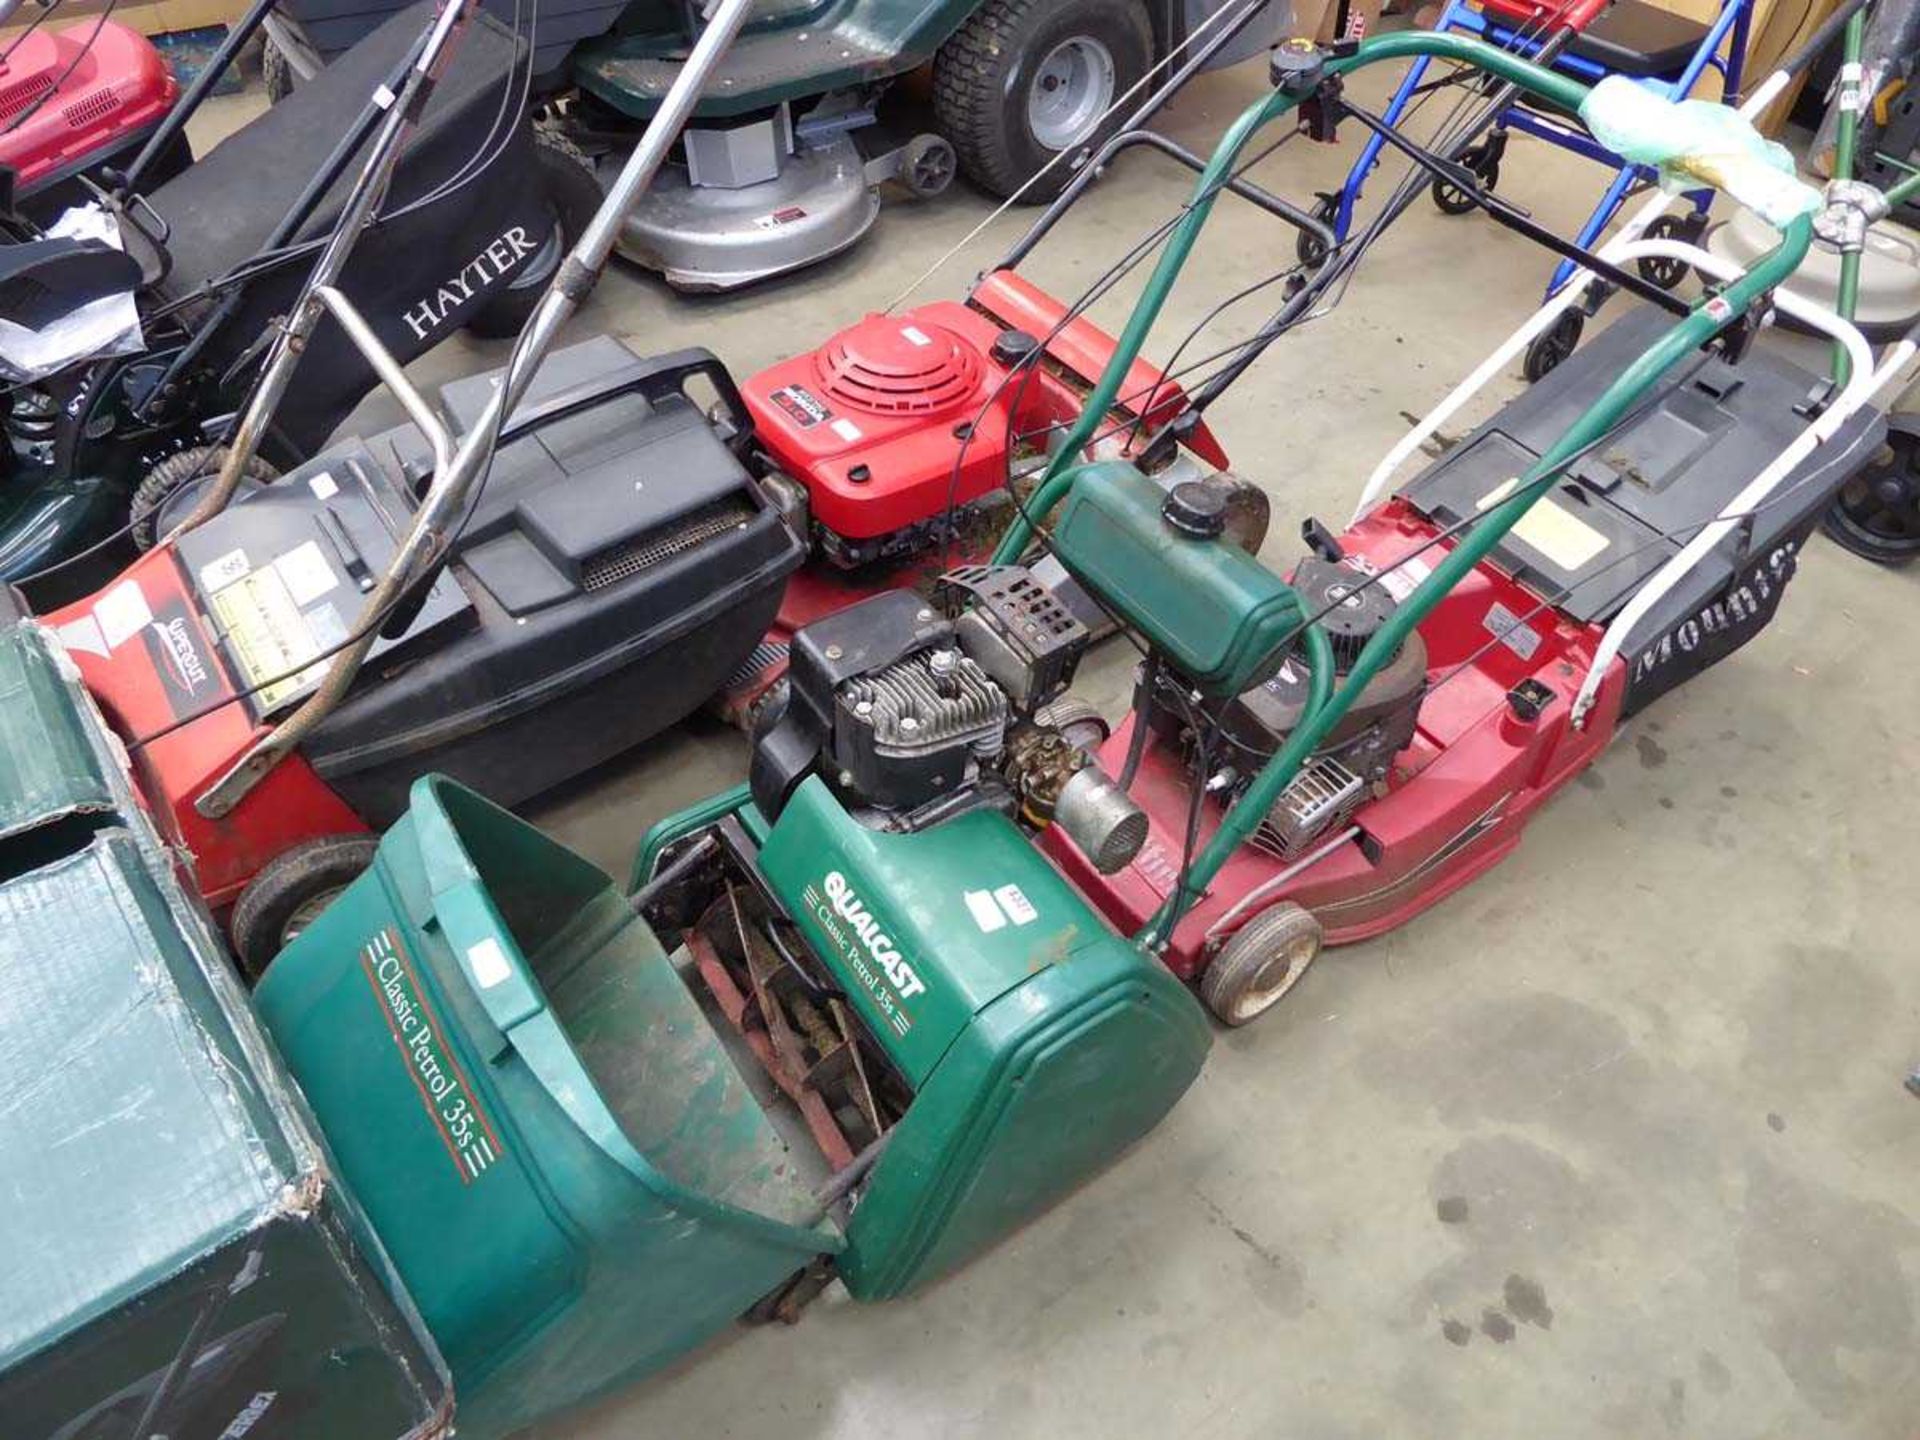 Qualcast petrol powered cylinder mower with grass box